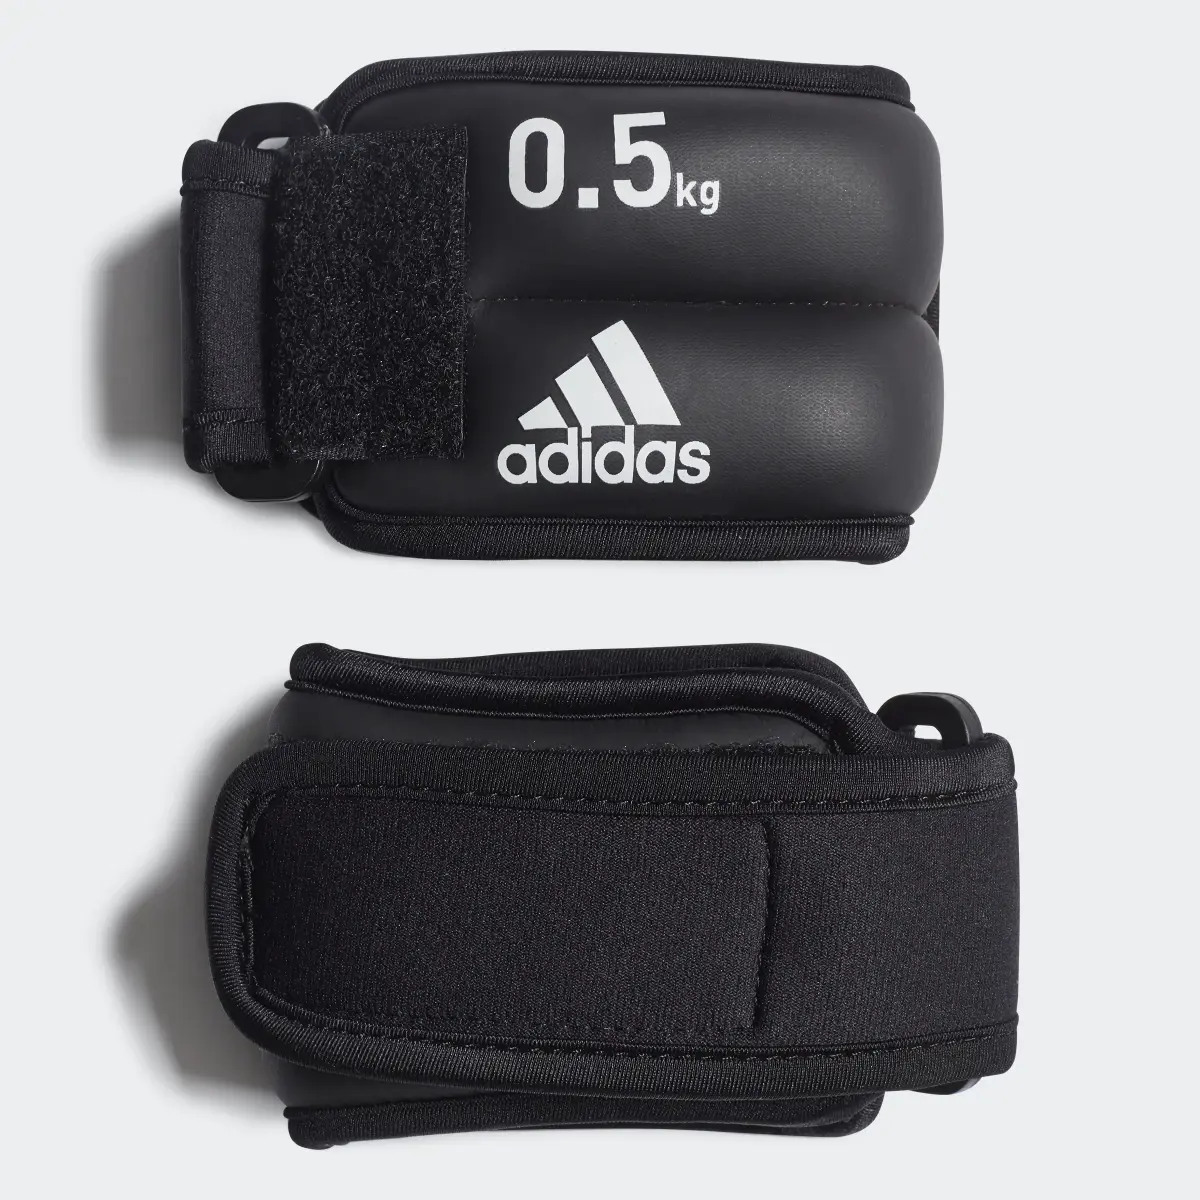 Adidas Ankle / Wrist Weights. 2